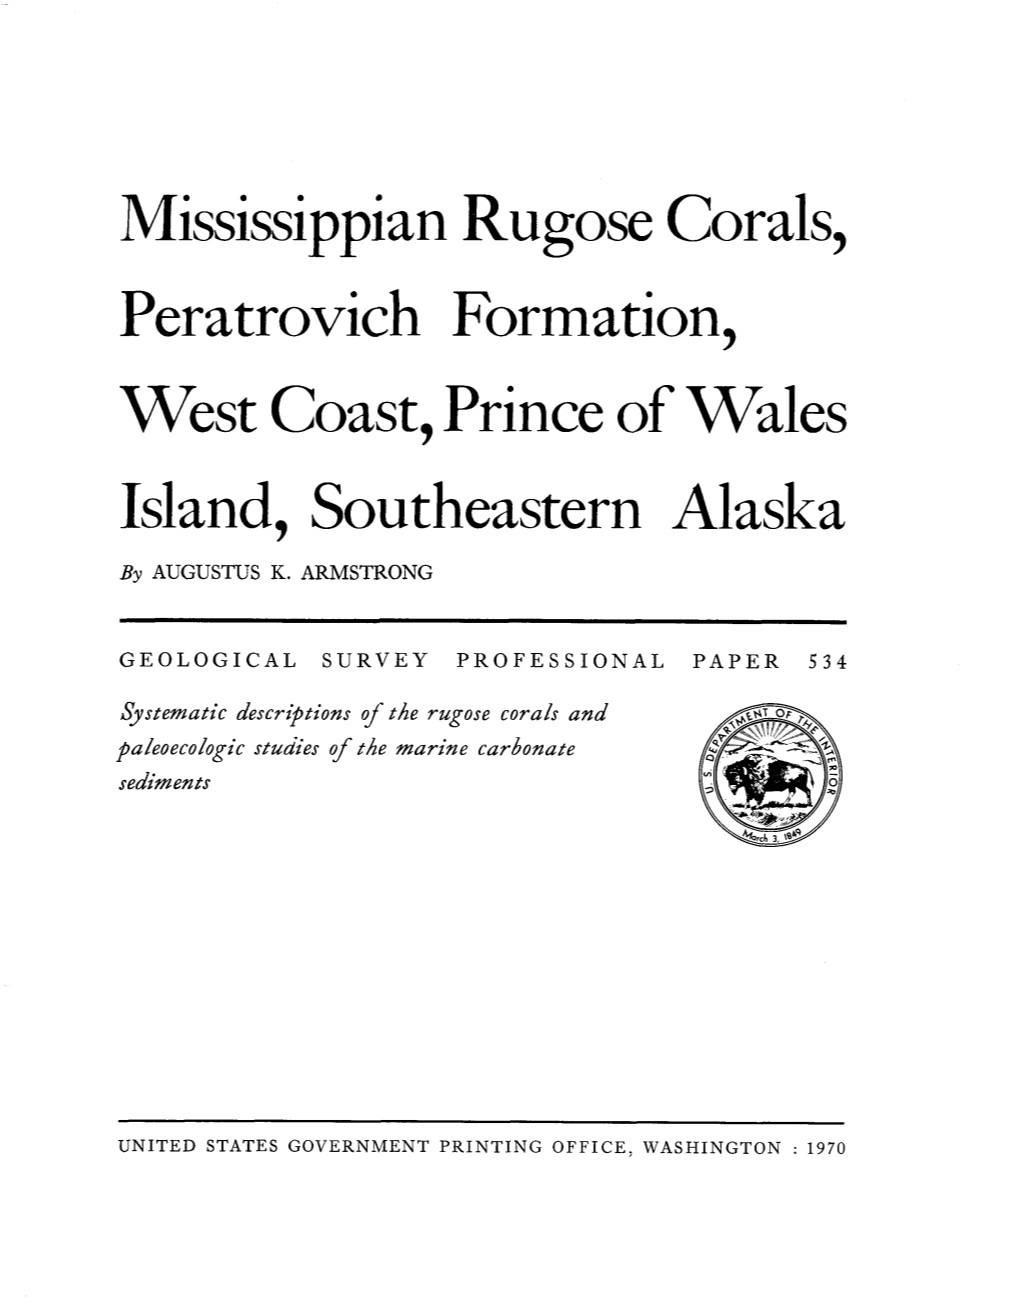 Mississippian Rugose Corals, Peratrovich Formation, West Coast, Prince of Wales Island, Southeastern Alaska by AUGUSTUS K